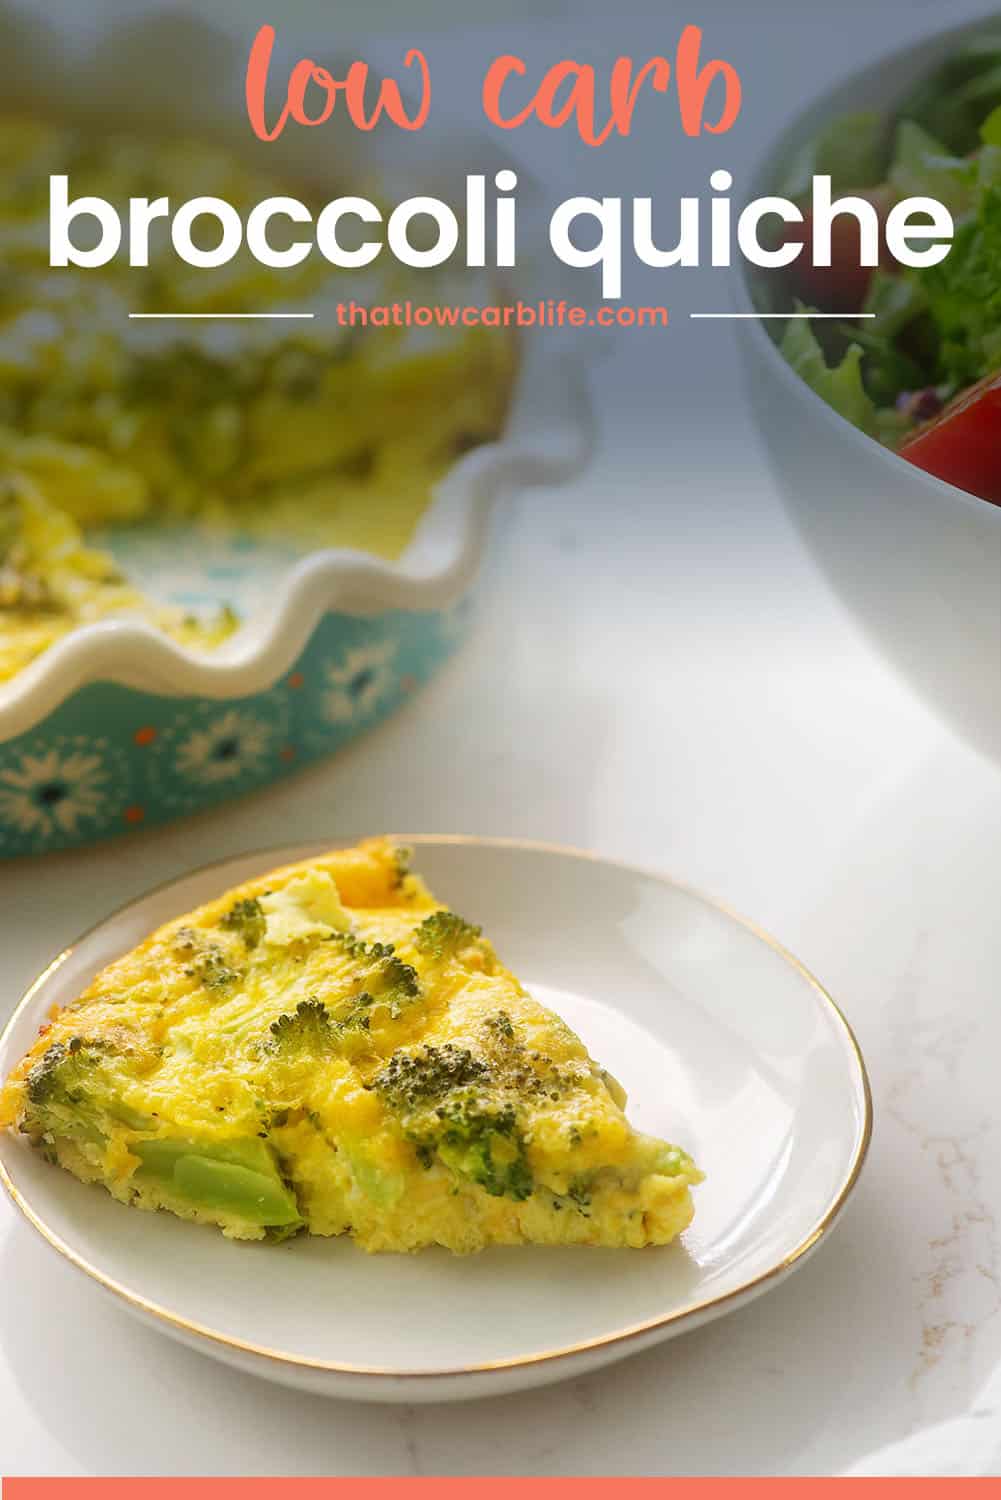 crustless broccoli quiche on white plate with text for Pinterest.